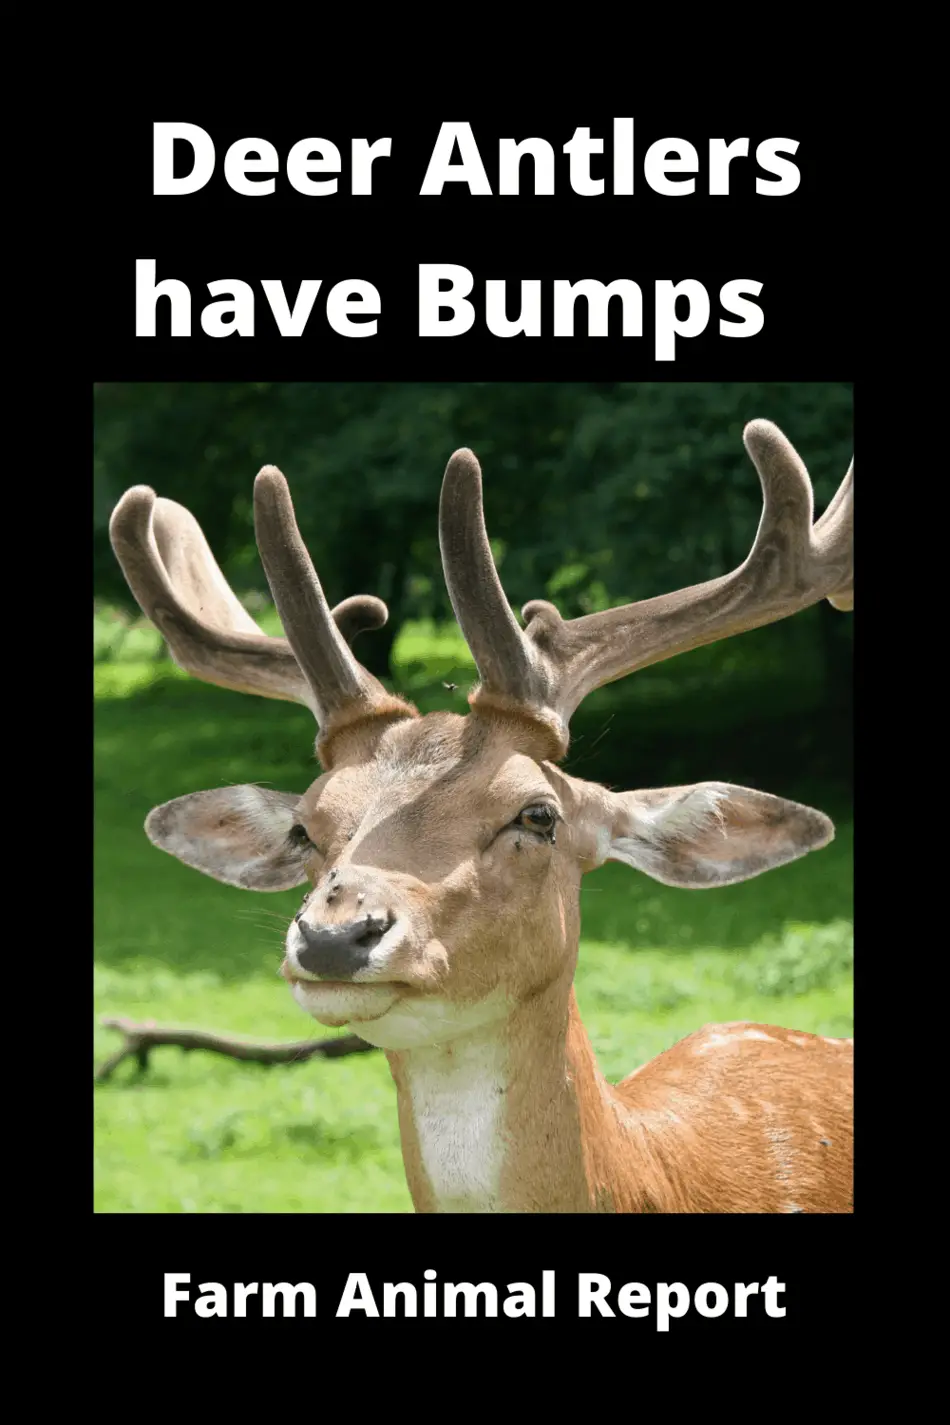 why-do-deer-antlers-have-bumps-charts-3-videos